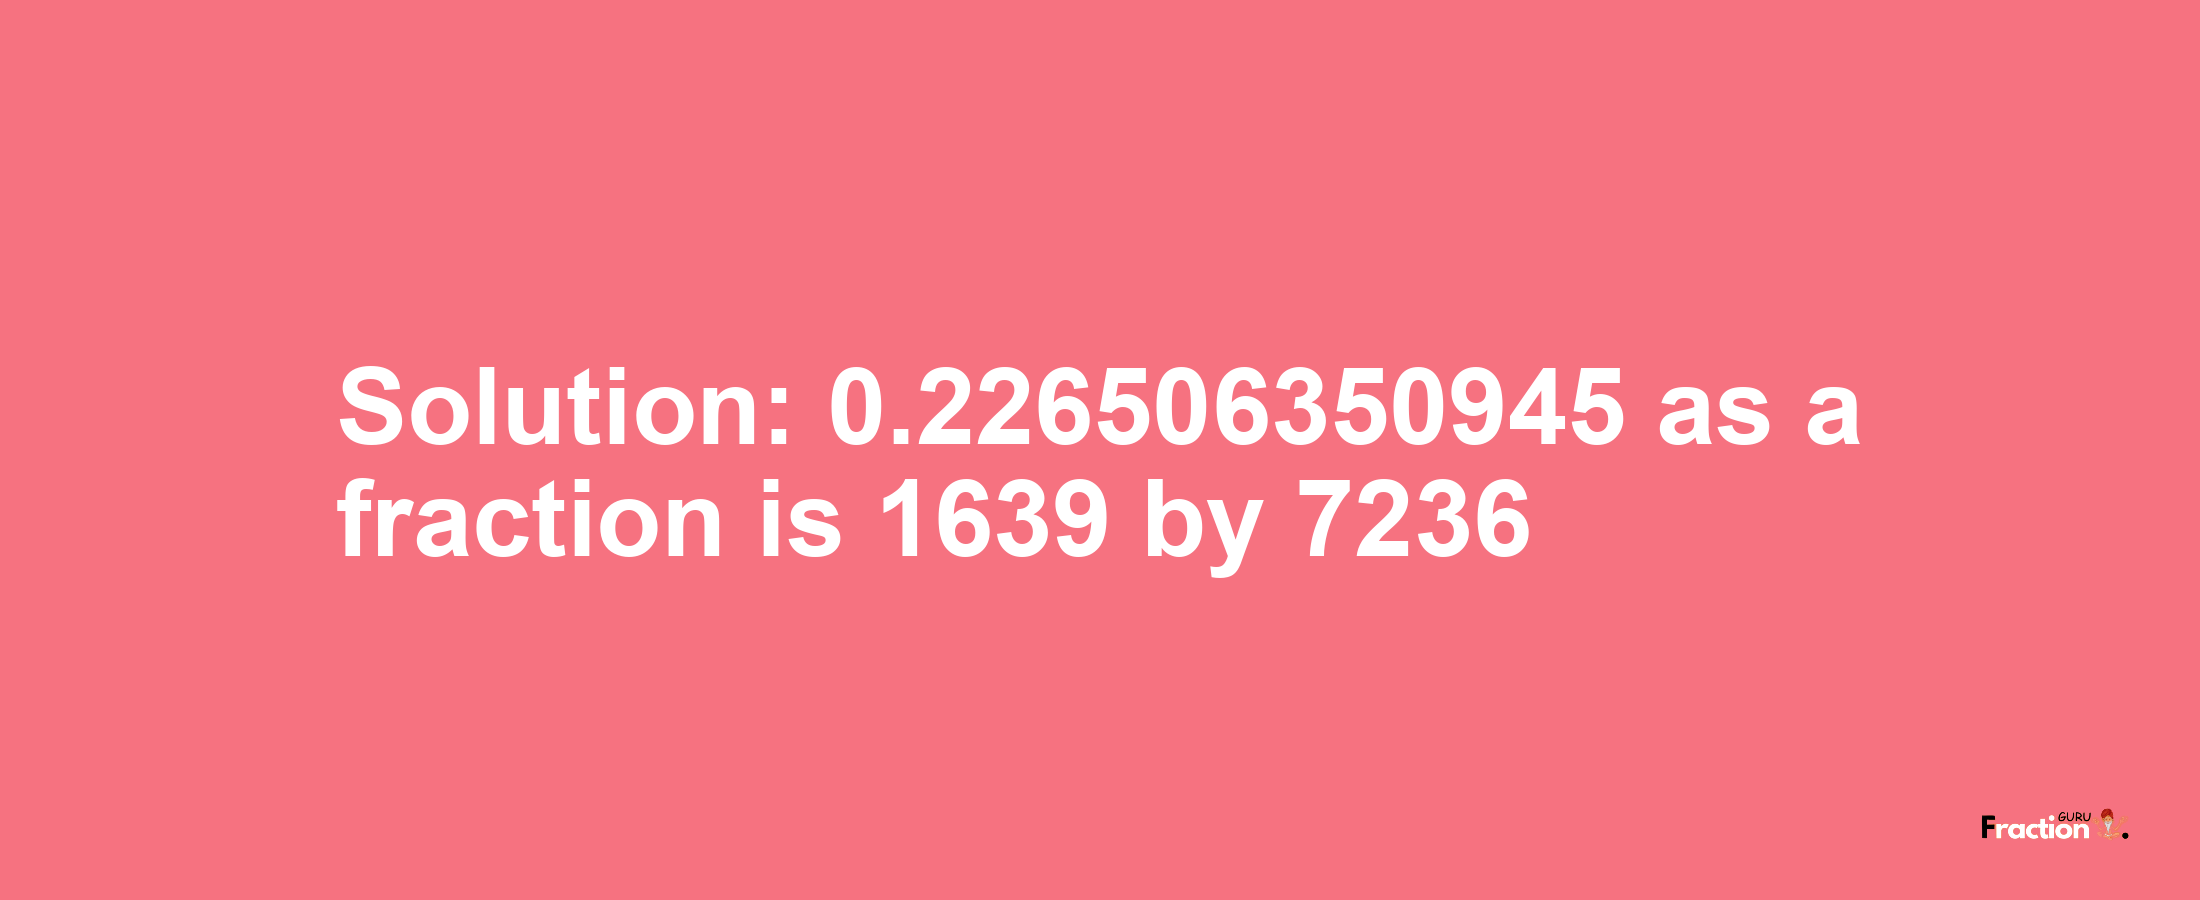 Solution:0.226506350945 as a fraction is 1639/7236